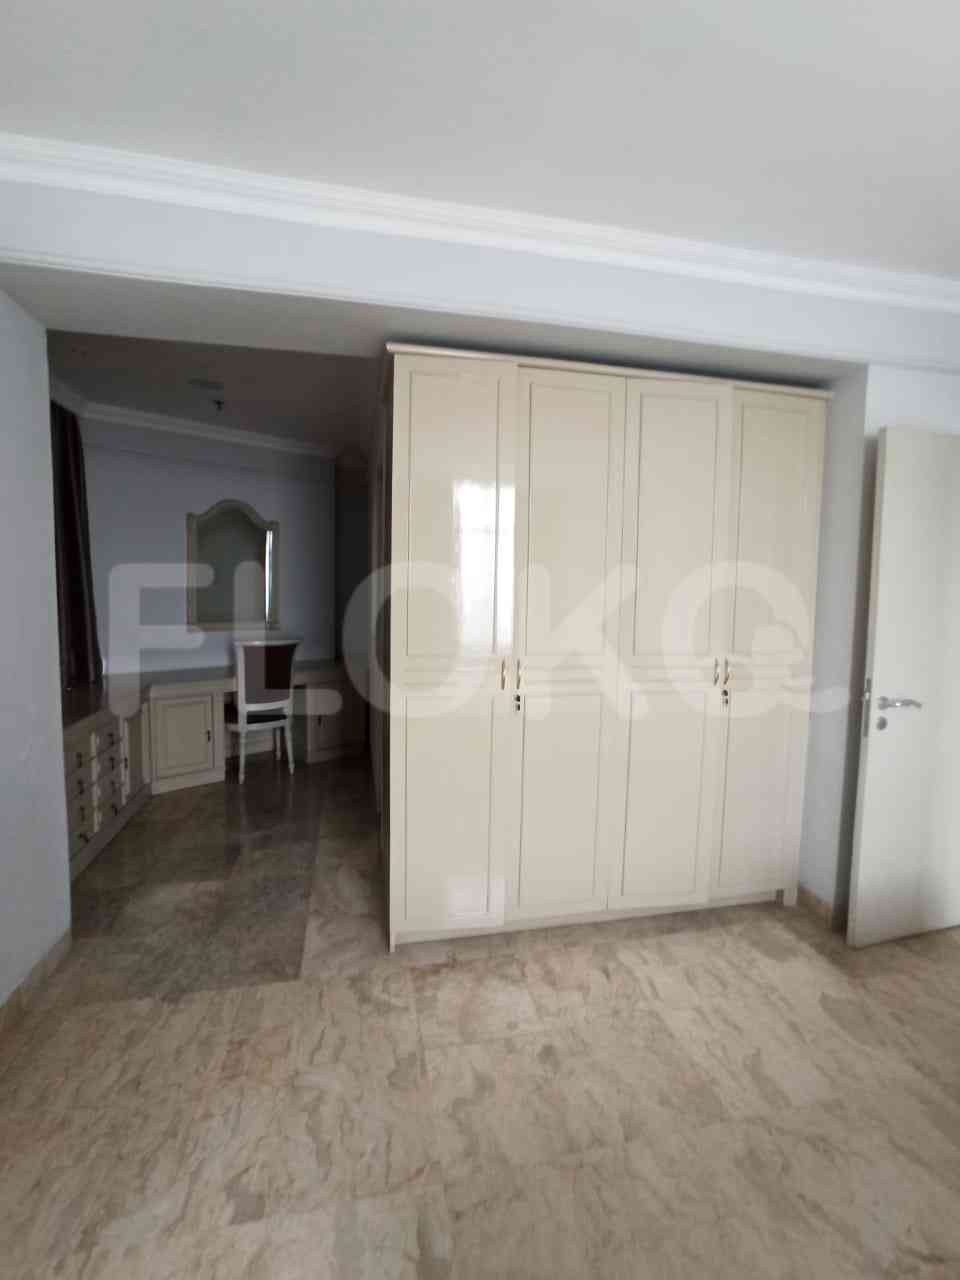 2 Bedroom on 15th Floor for Rent in Parama Apartment - ftb42a 3